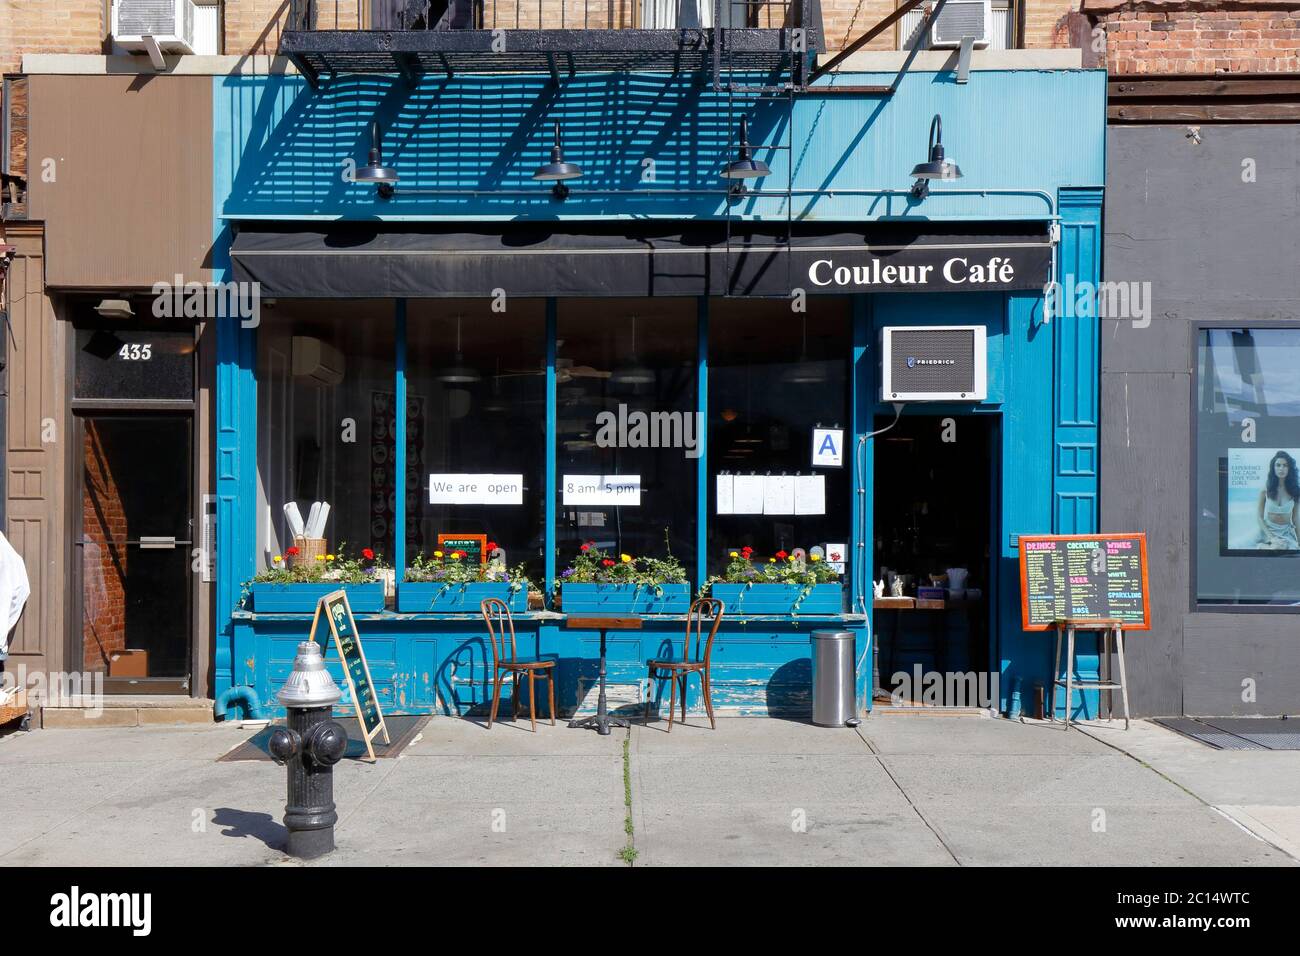 Couleur Café, 435 7th Ave, Brooklyn, New York. NYC storefront photo of a French cafe in the Park Slope neighborhood. Stock Photo